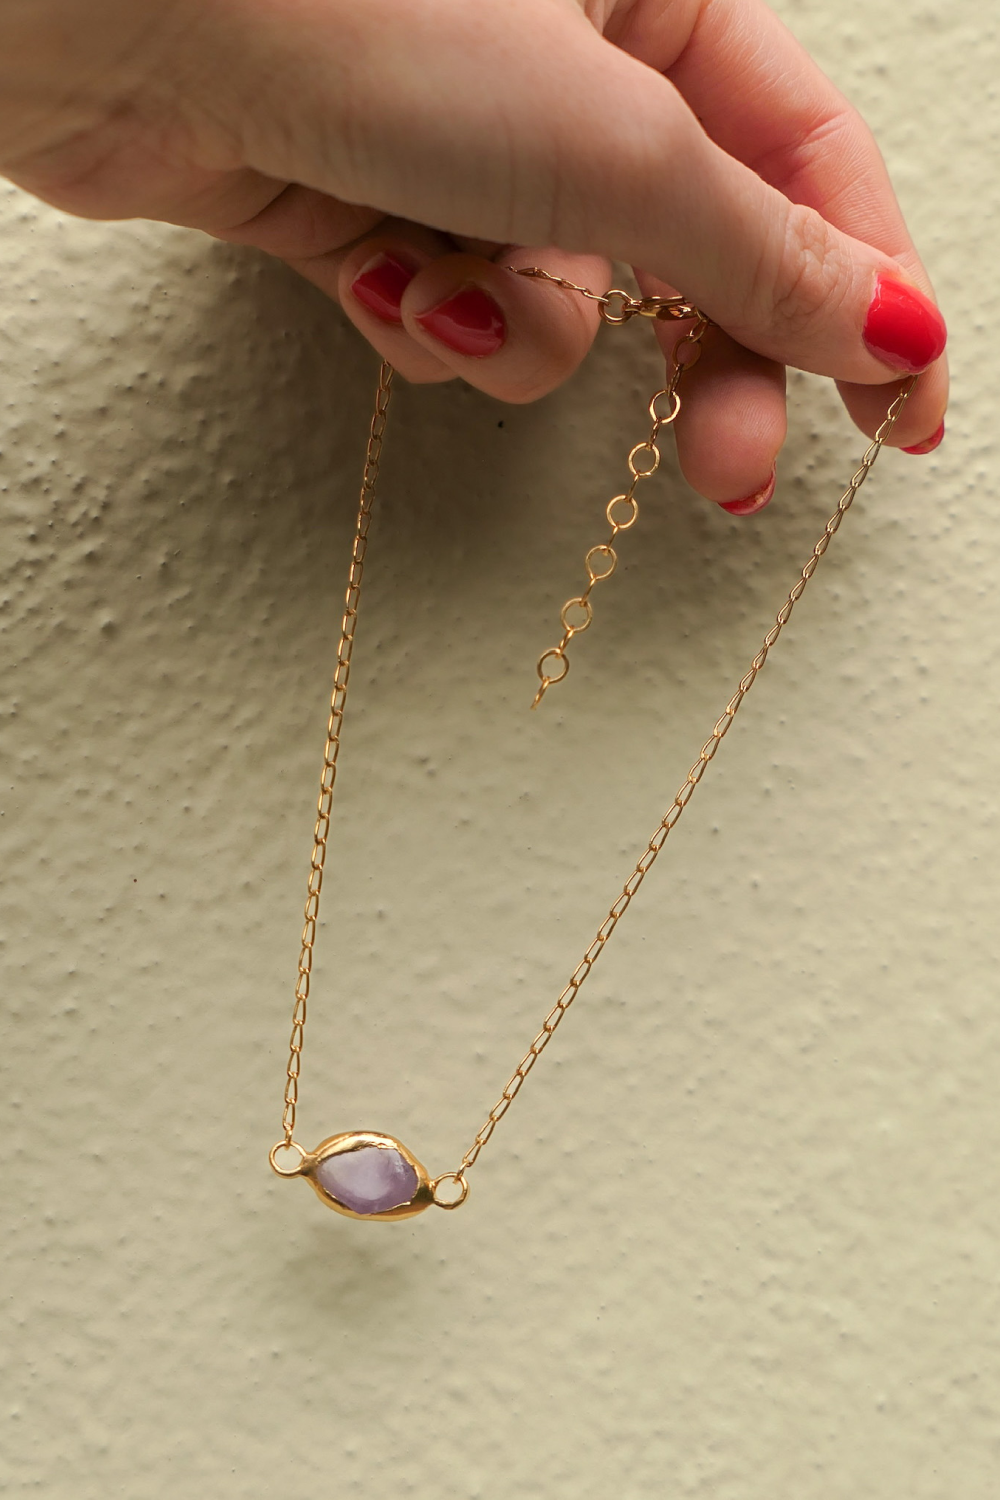 Amethyst Chakra Necklace - Tea & Tequila